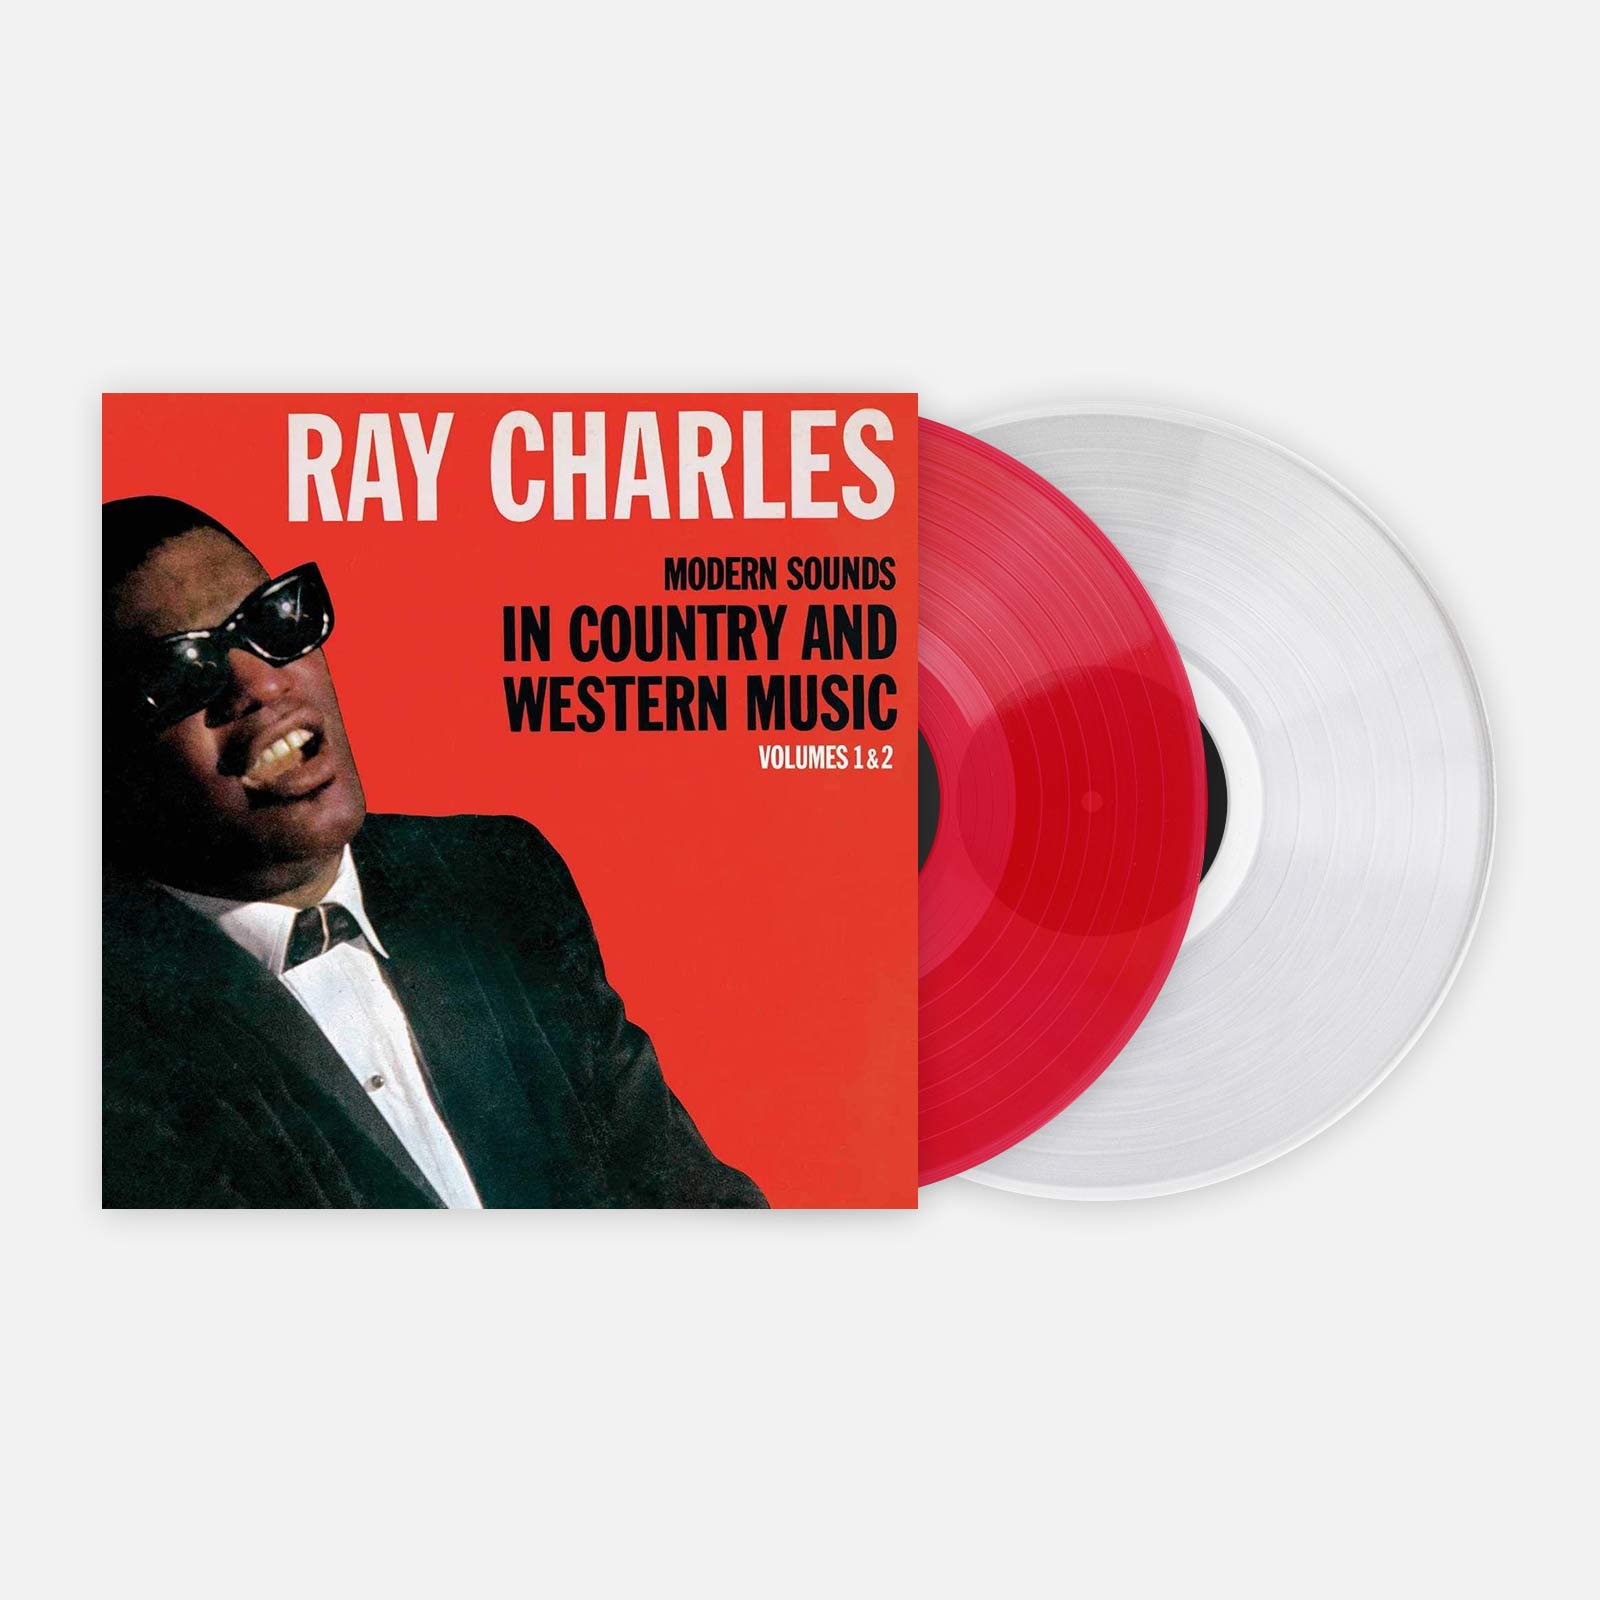 Tjen hånd offentliggøre Ray Charles 'Modern Sounds in Country and Western Music, Vol. 1 & 2' - Vinyl  Me, Please